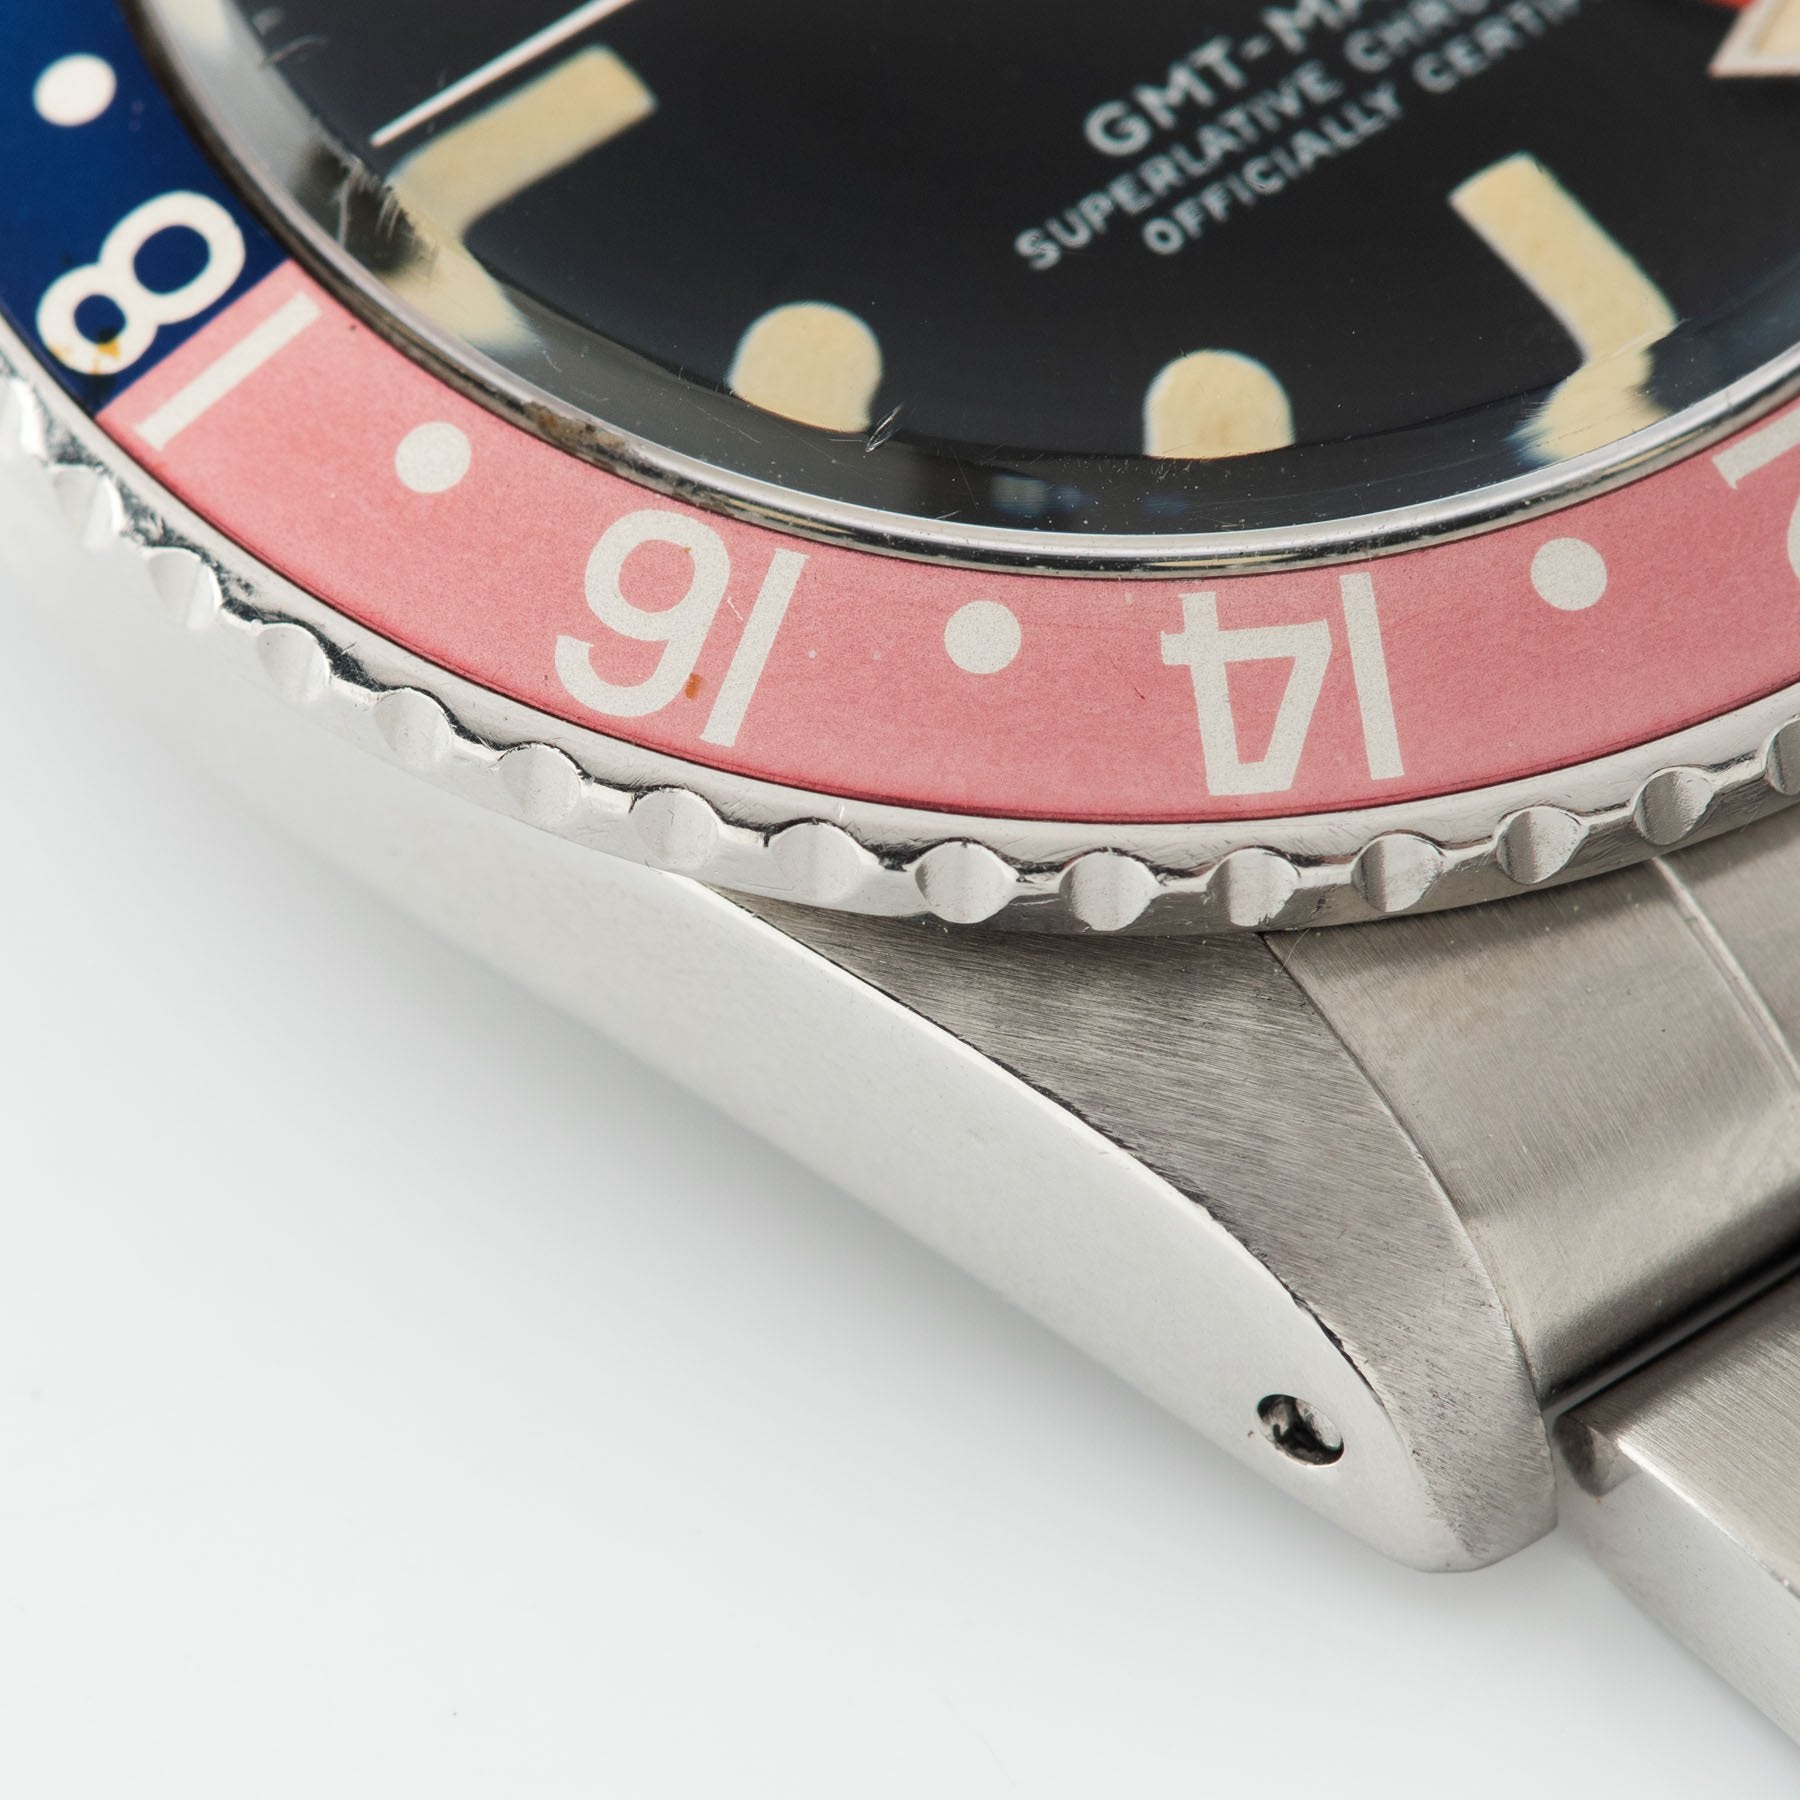 Rolex GMT-Master Reference 1675 with Mk4 Dial